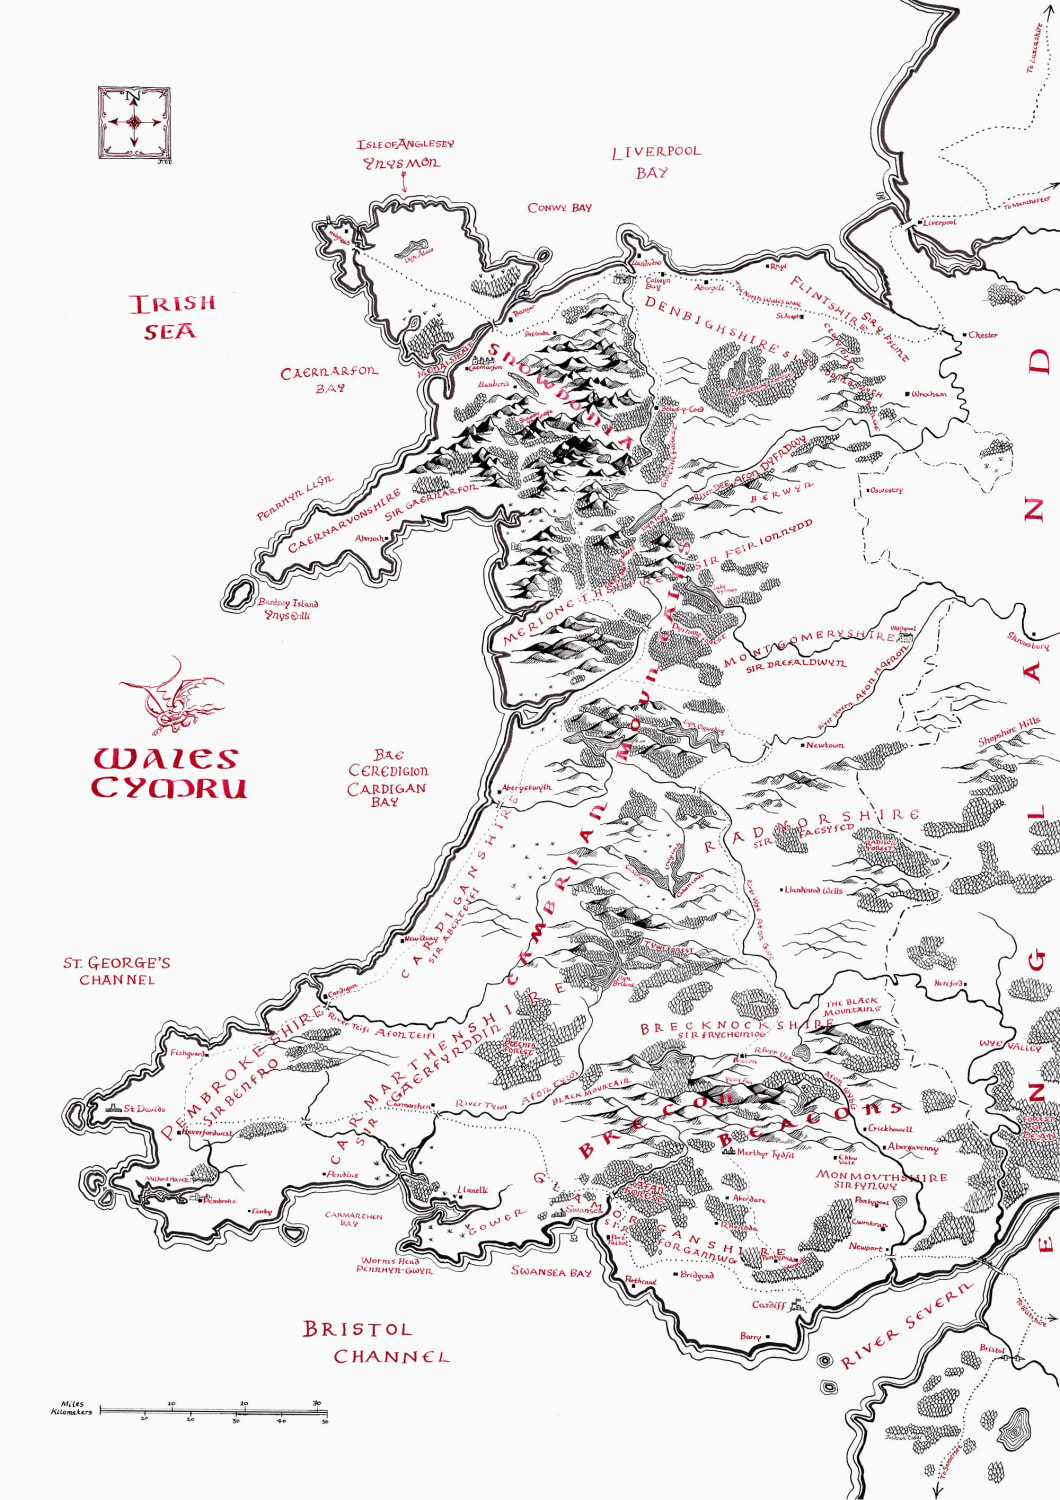 Wales, inspired by Tolkien